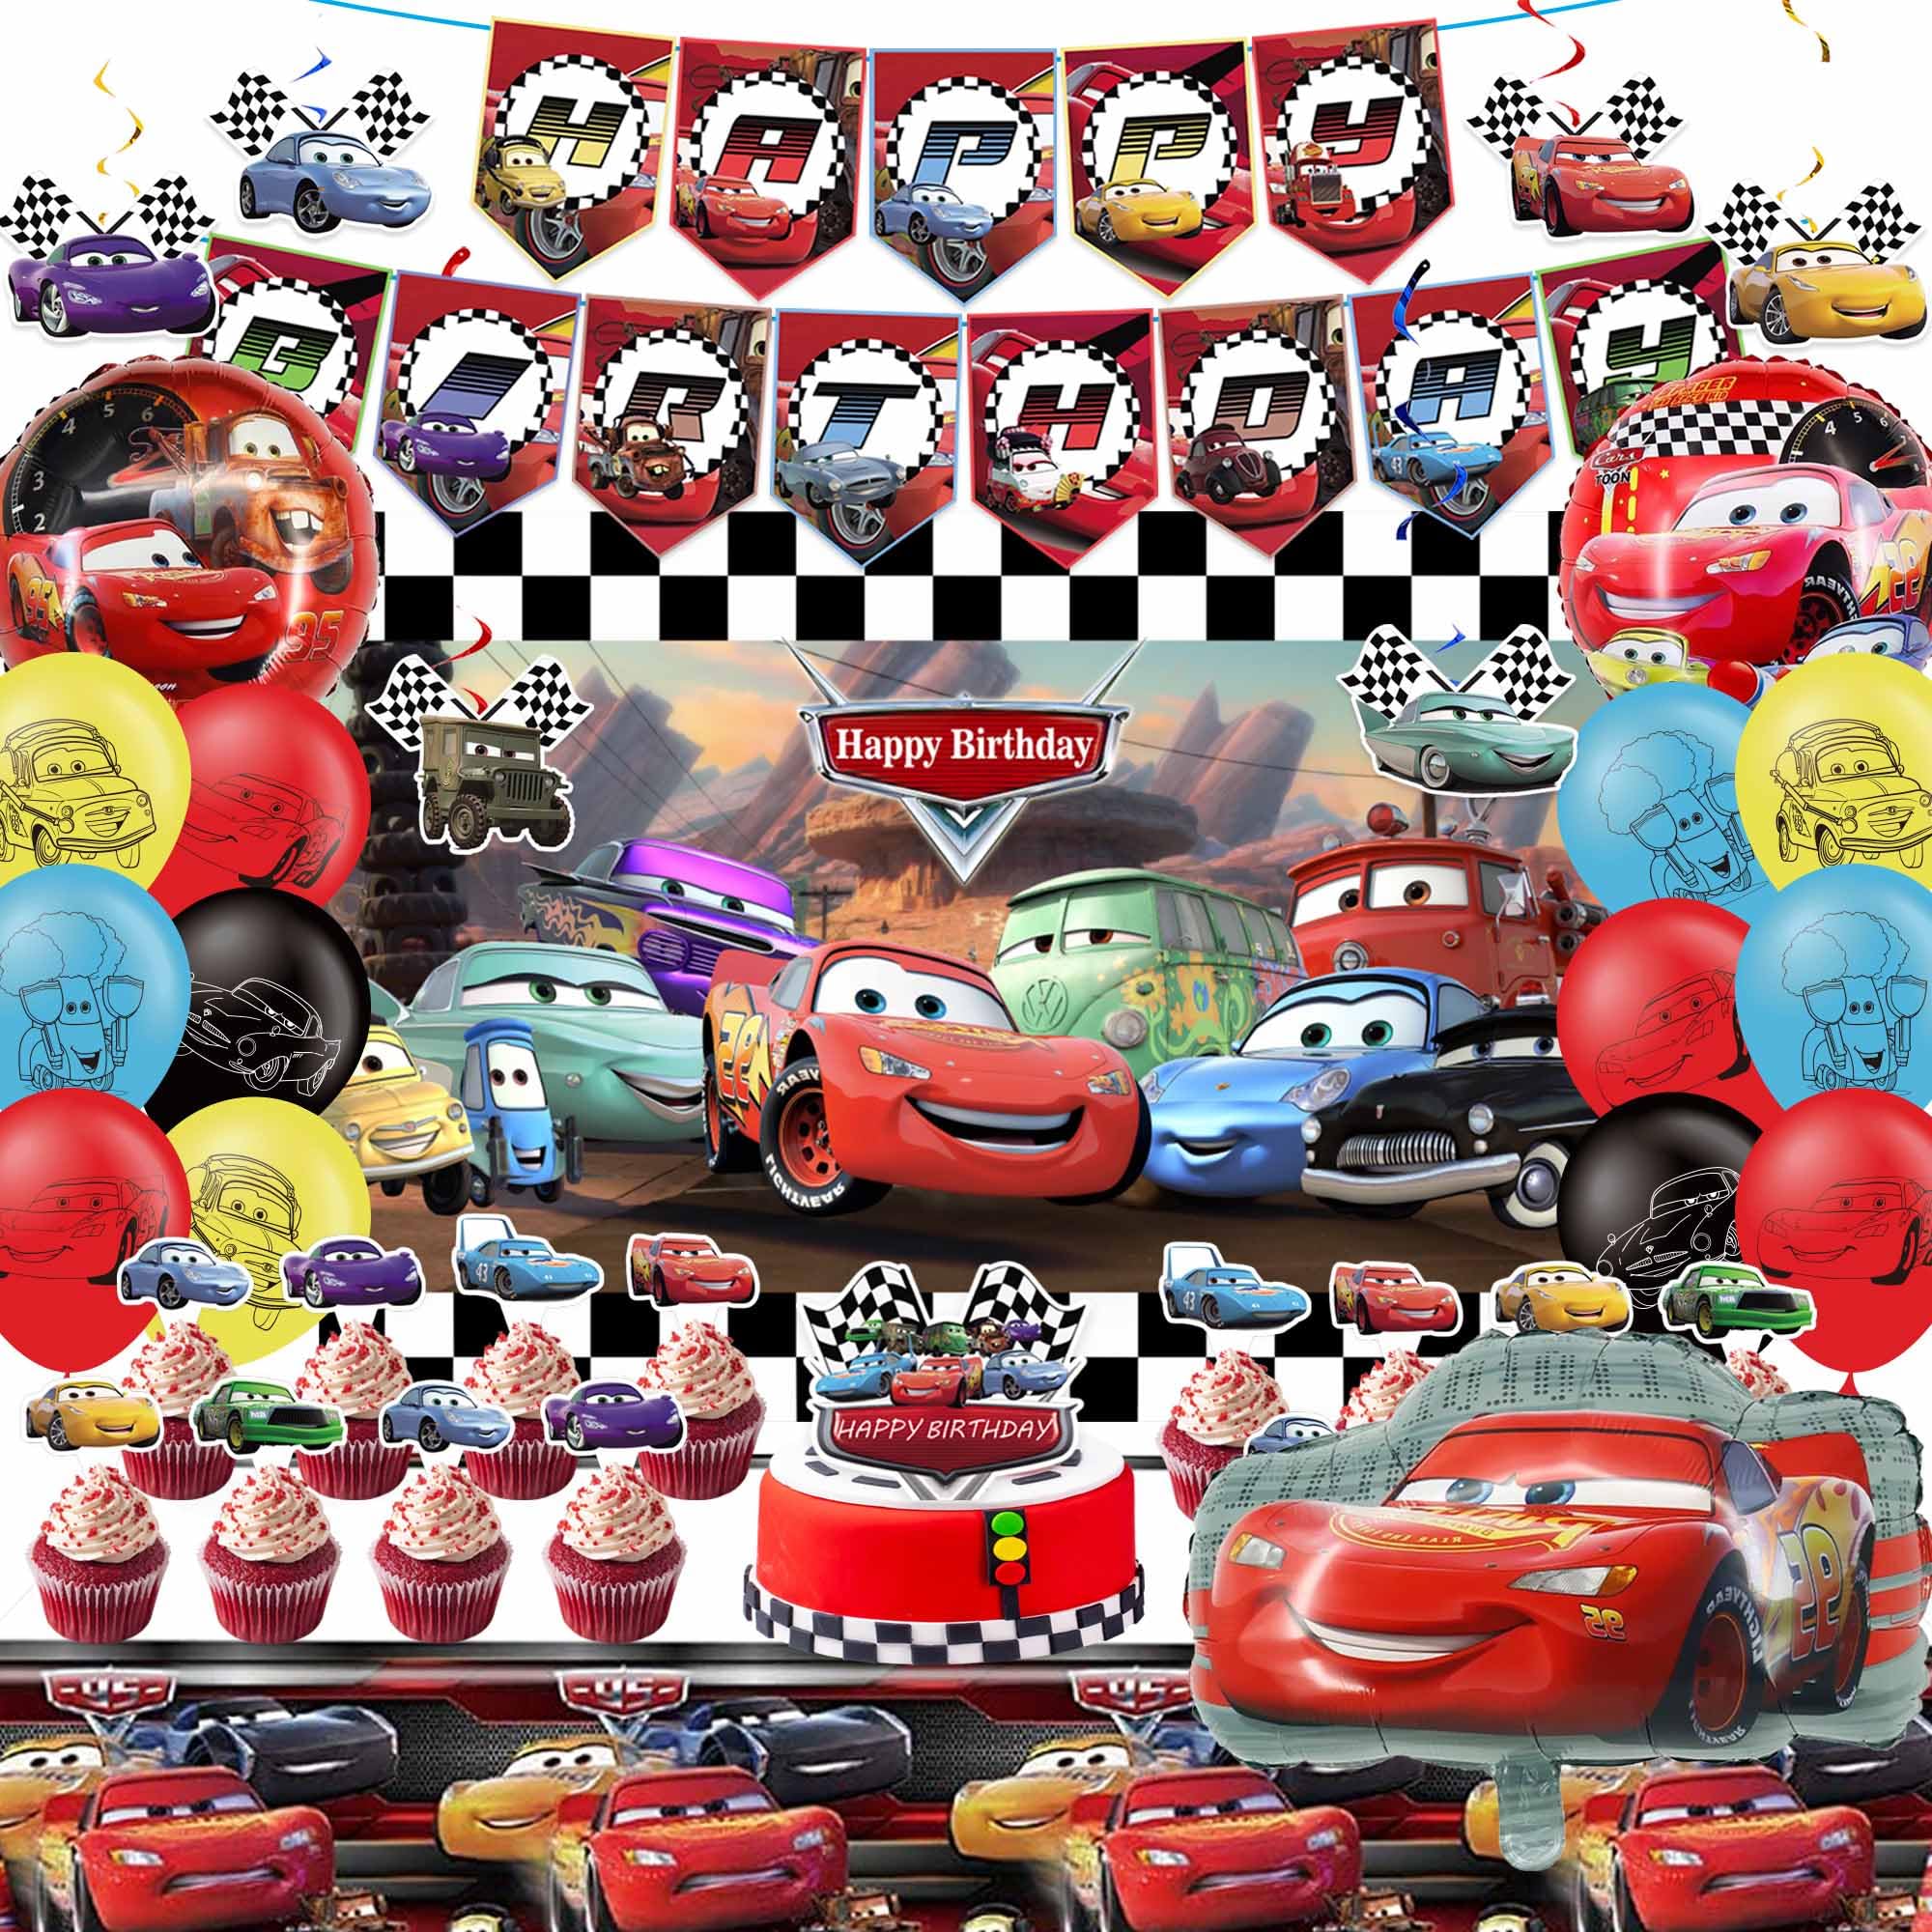 Cars Birthday Party Supplies, Lightning McQueen Cars Birthday Decorations Include Birthday Banner, Foil Balloons, Backdrop, Tablecloth, Cupcake Toppers for Boys Girls